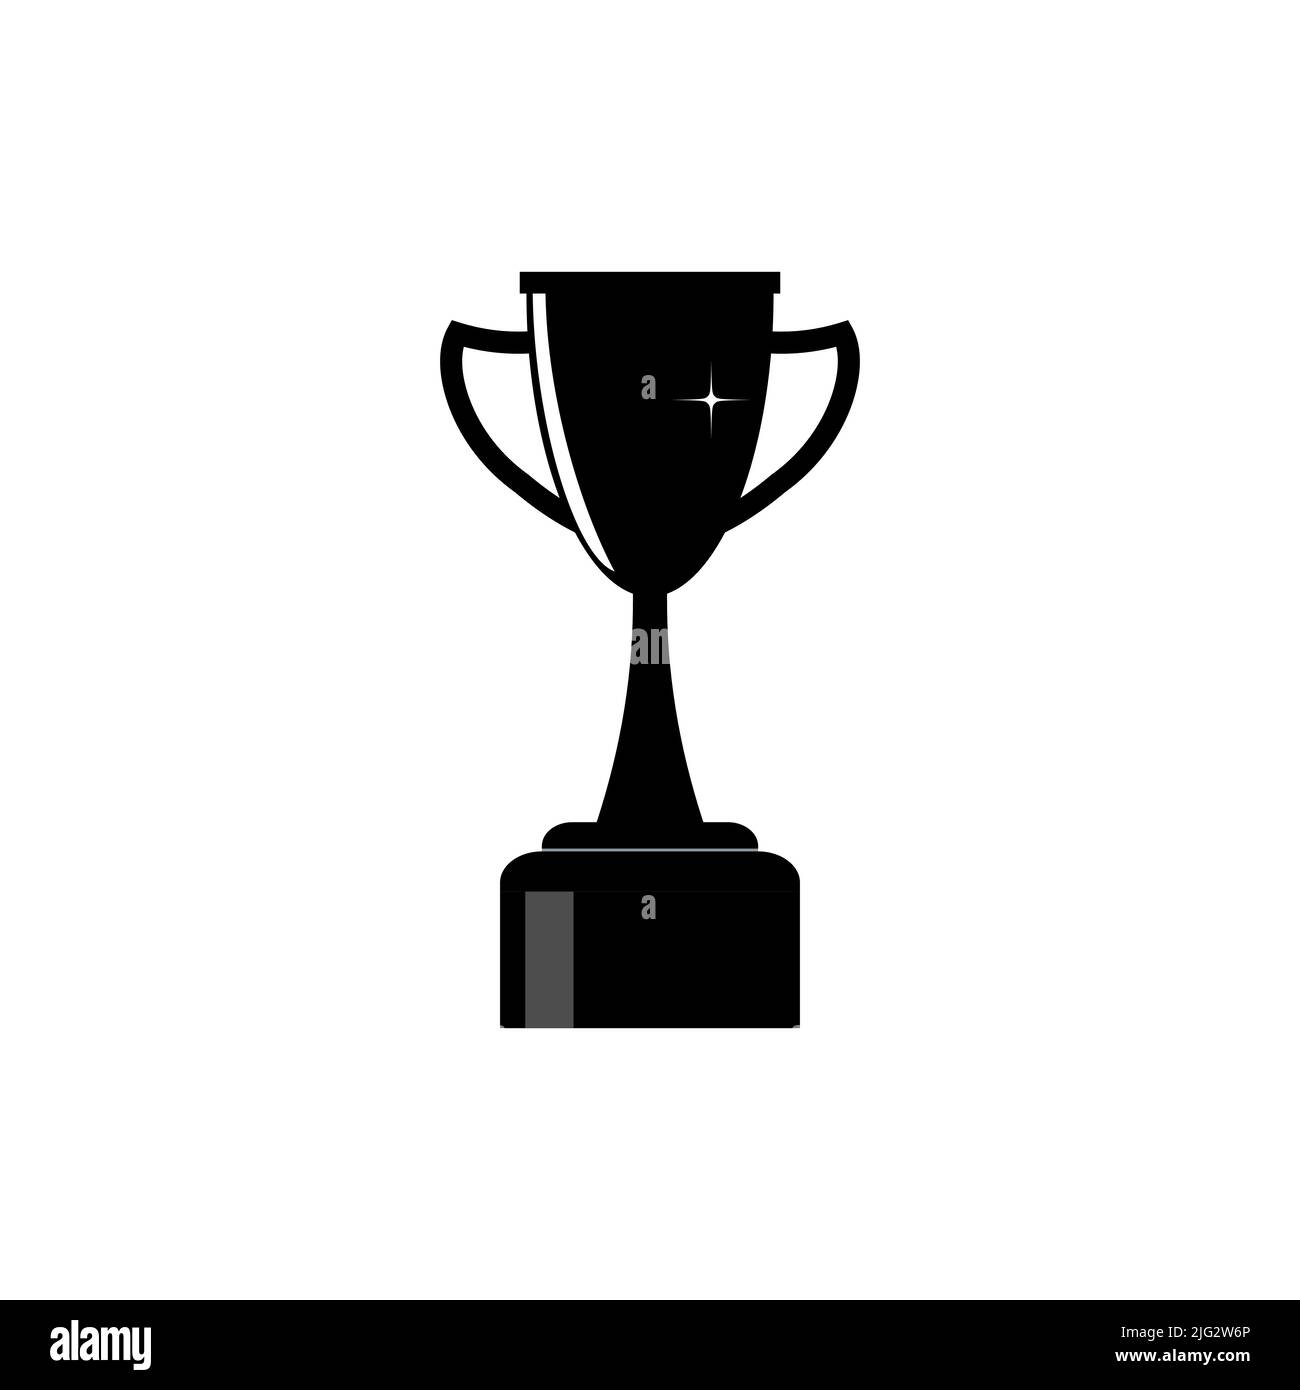 Trophy Winners Cup Trophy Cup Vector Illustration Stock Vector Image